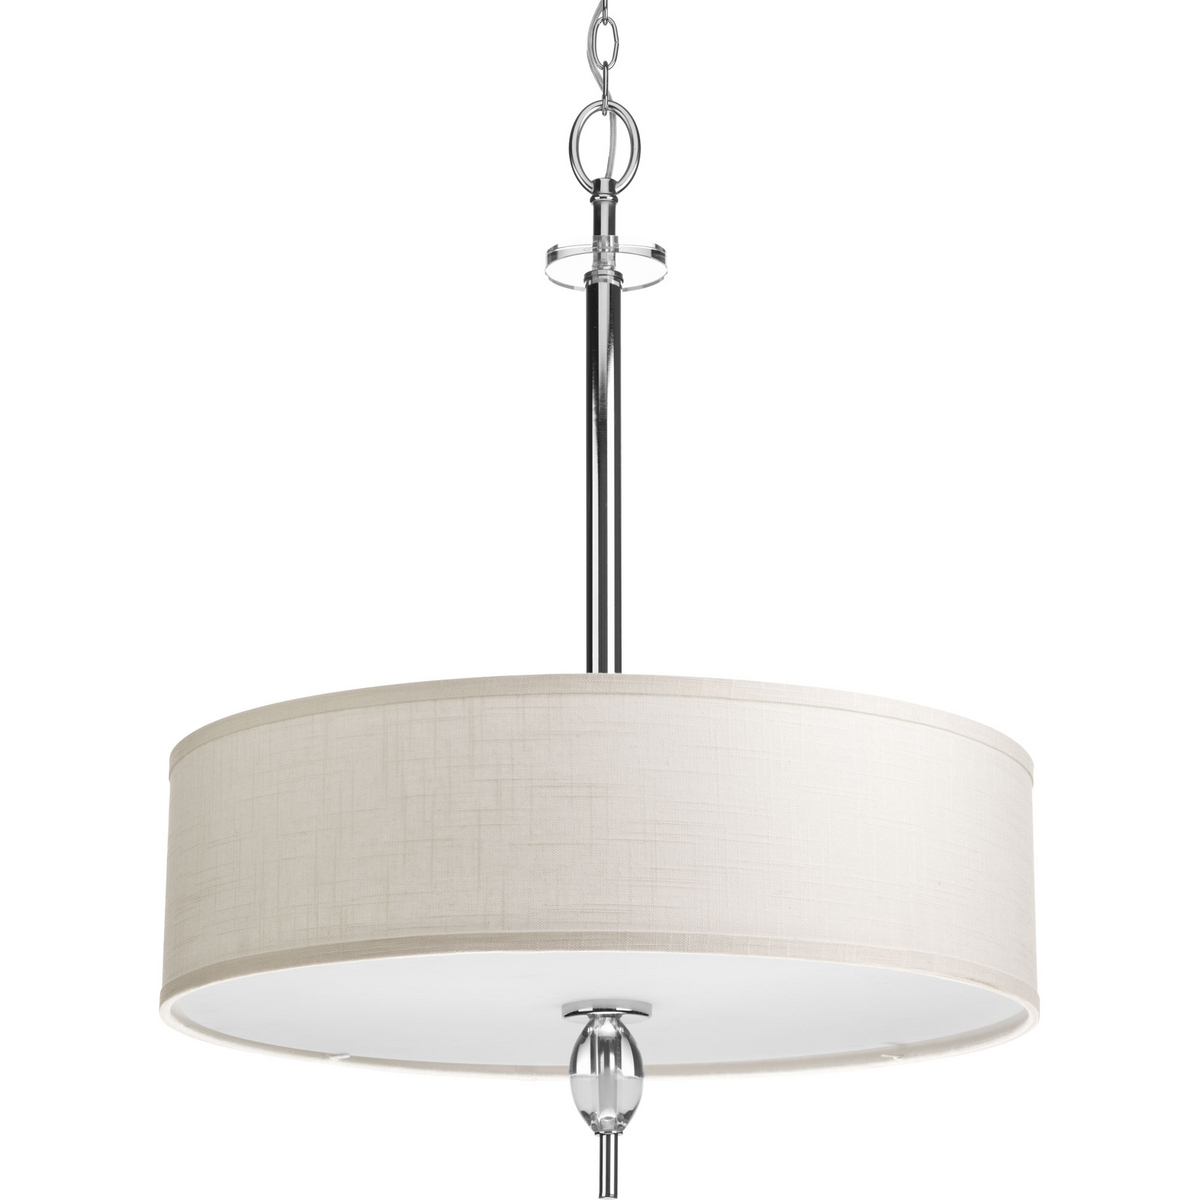 Enjoy high status with a collection full of fun, femininity, glimmer and glean. Status can excite the room as K9 glass accents offer a crystal-like clarity. Off-White fabric shade is matched perfectly with the polished chrome finish completing the four-light pendant with a sophisticated look.